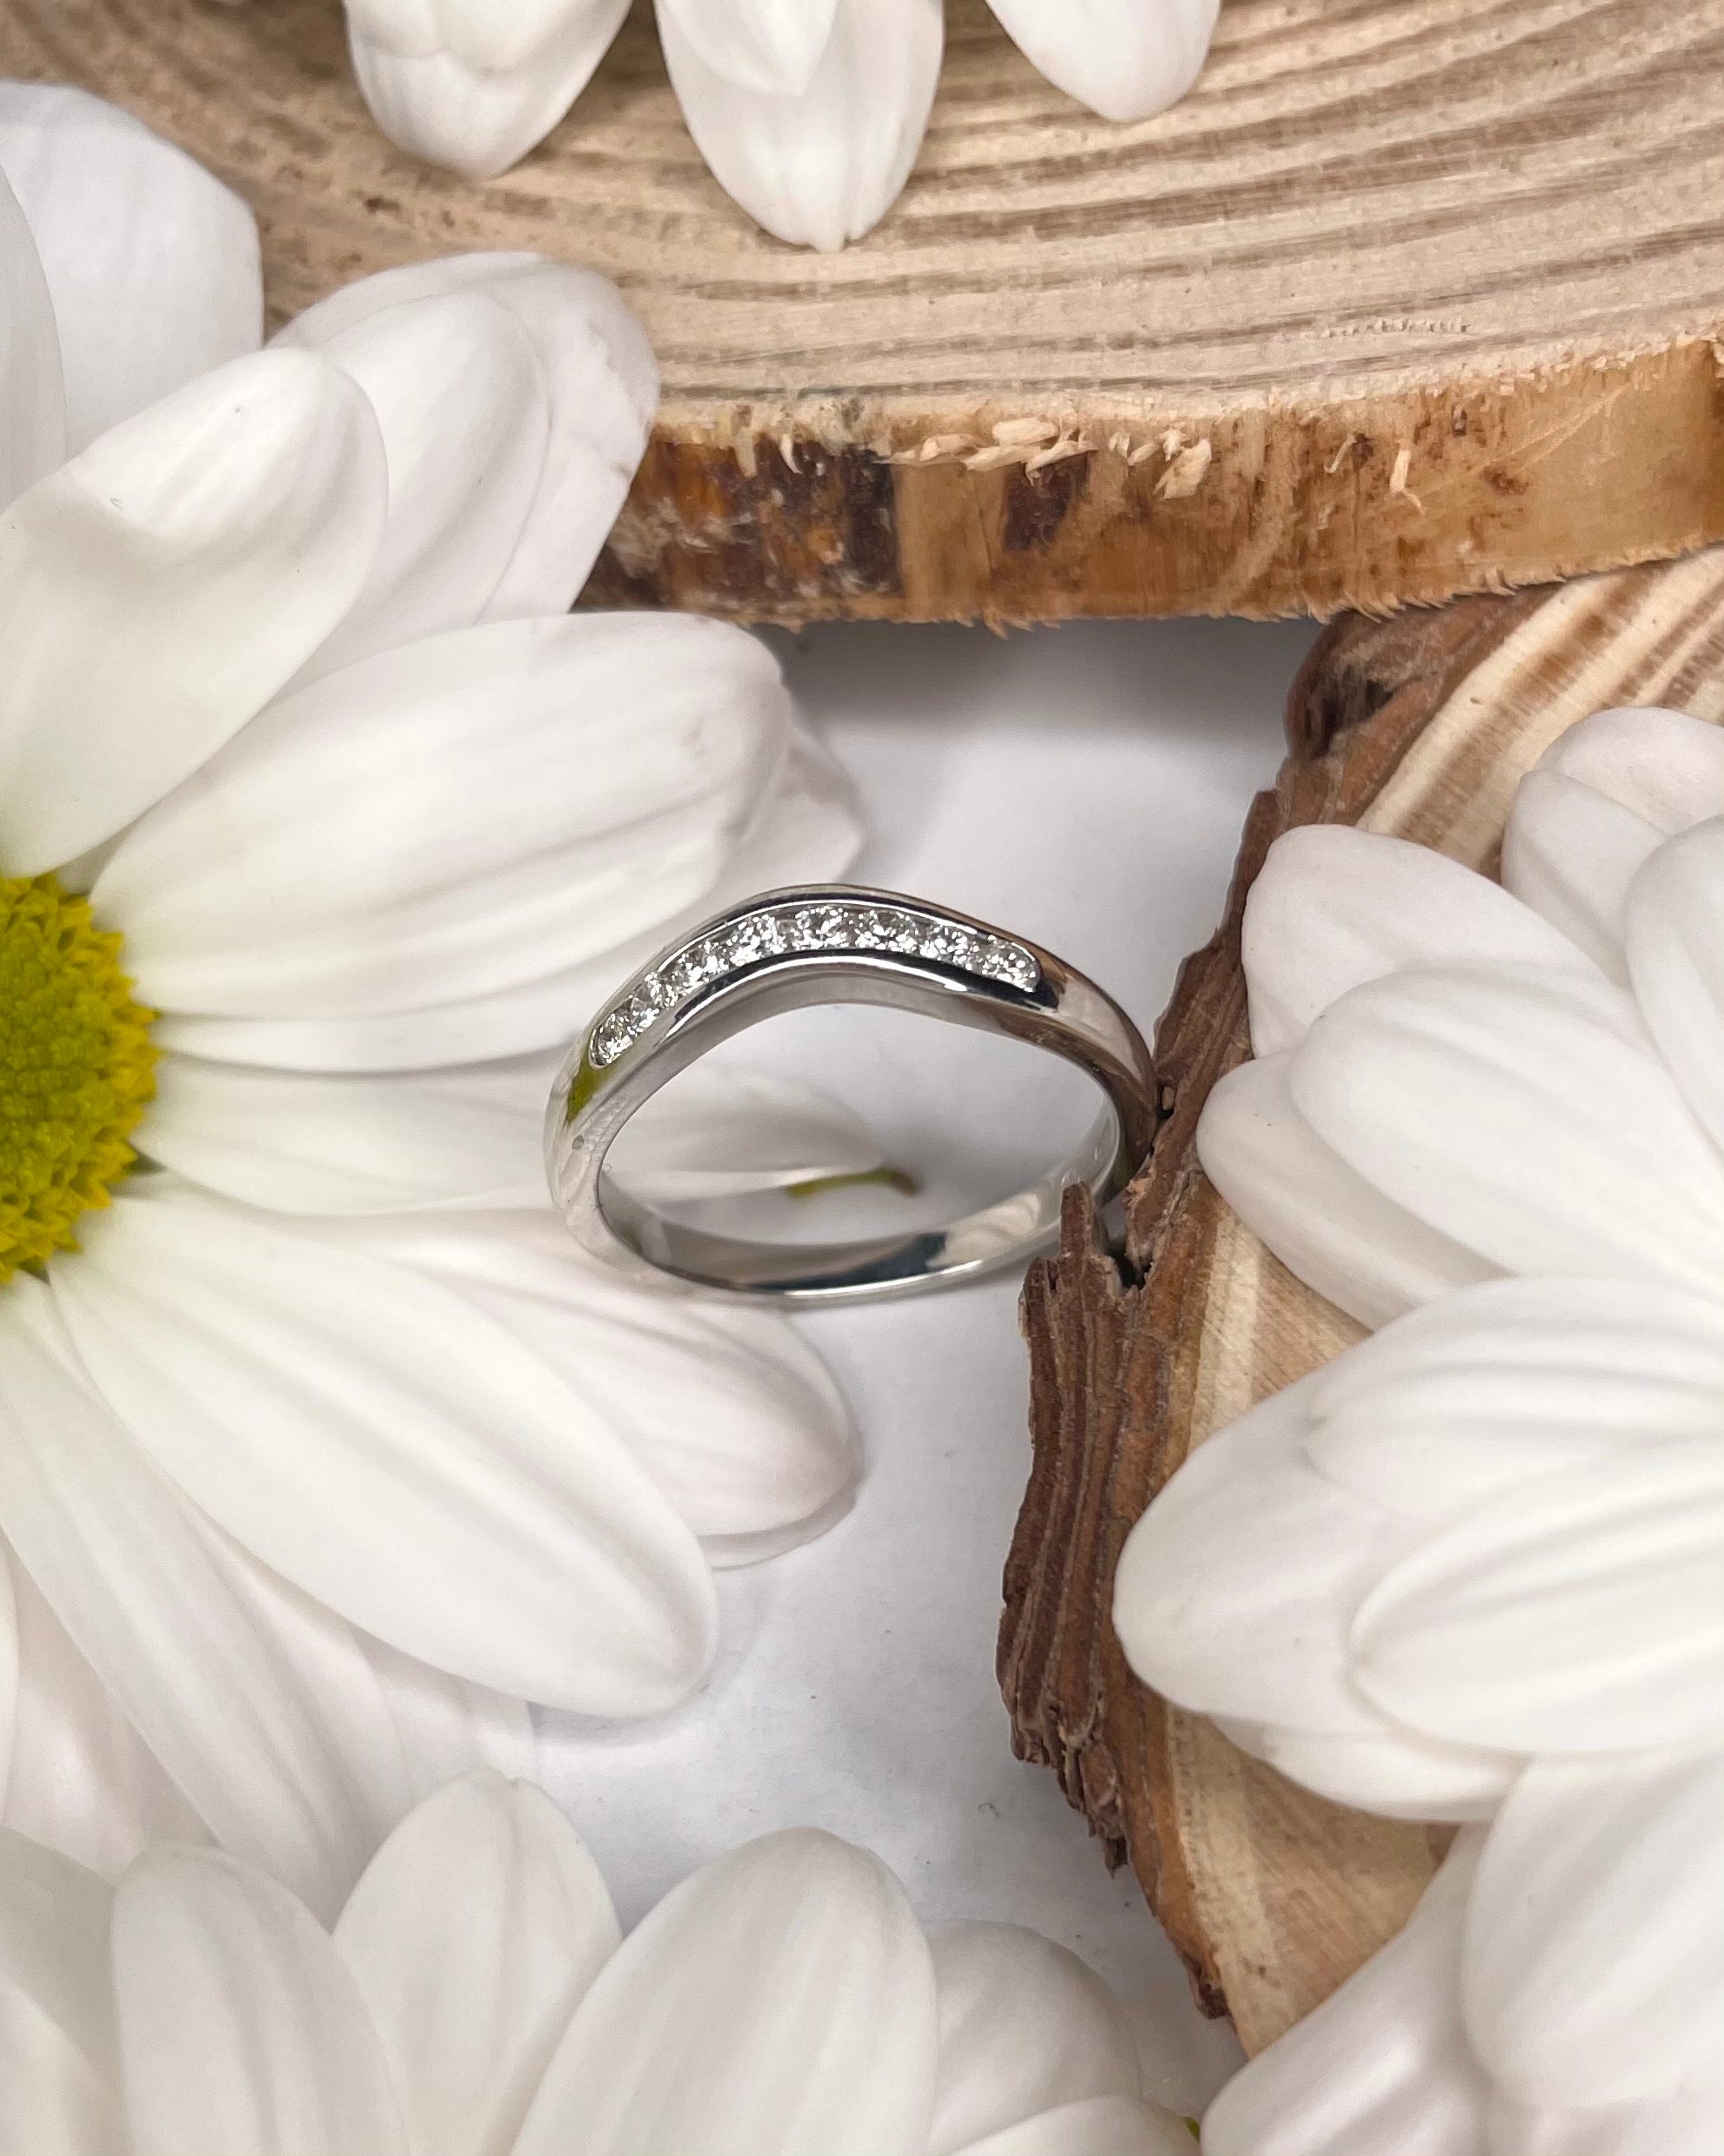 Unique Wedding Rings: 27 Wedding Rings For The Modern Bride